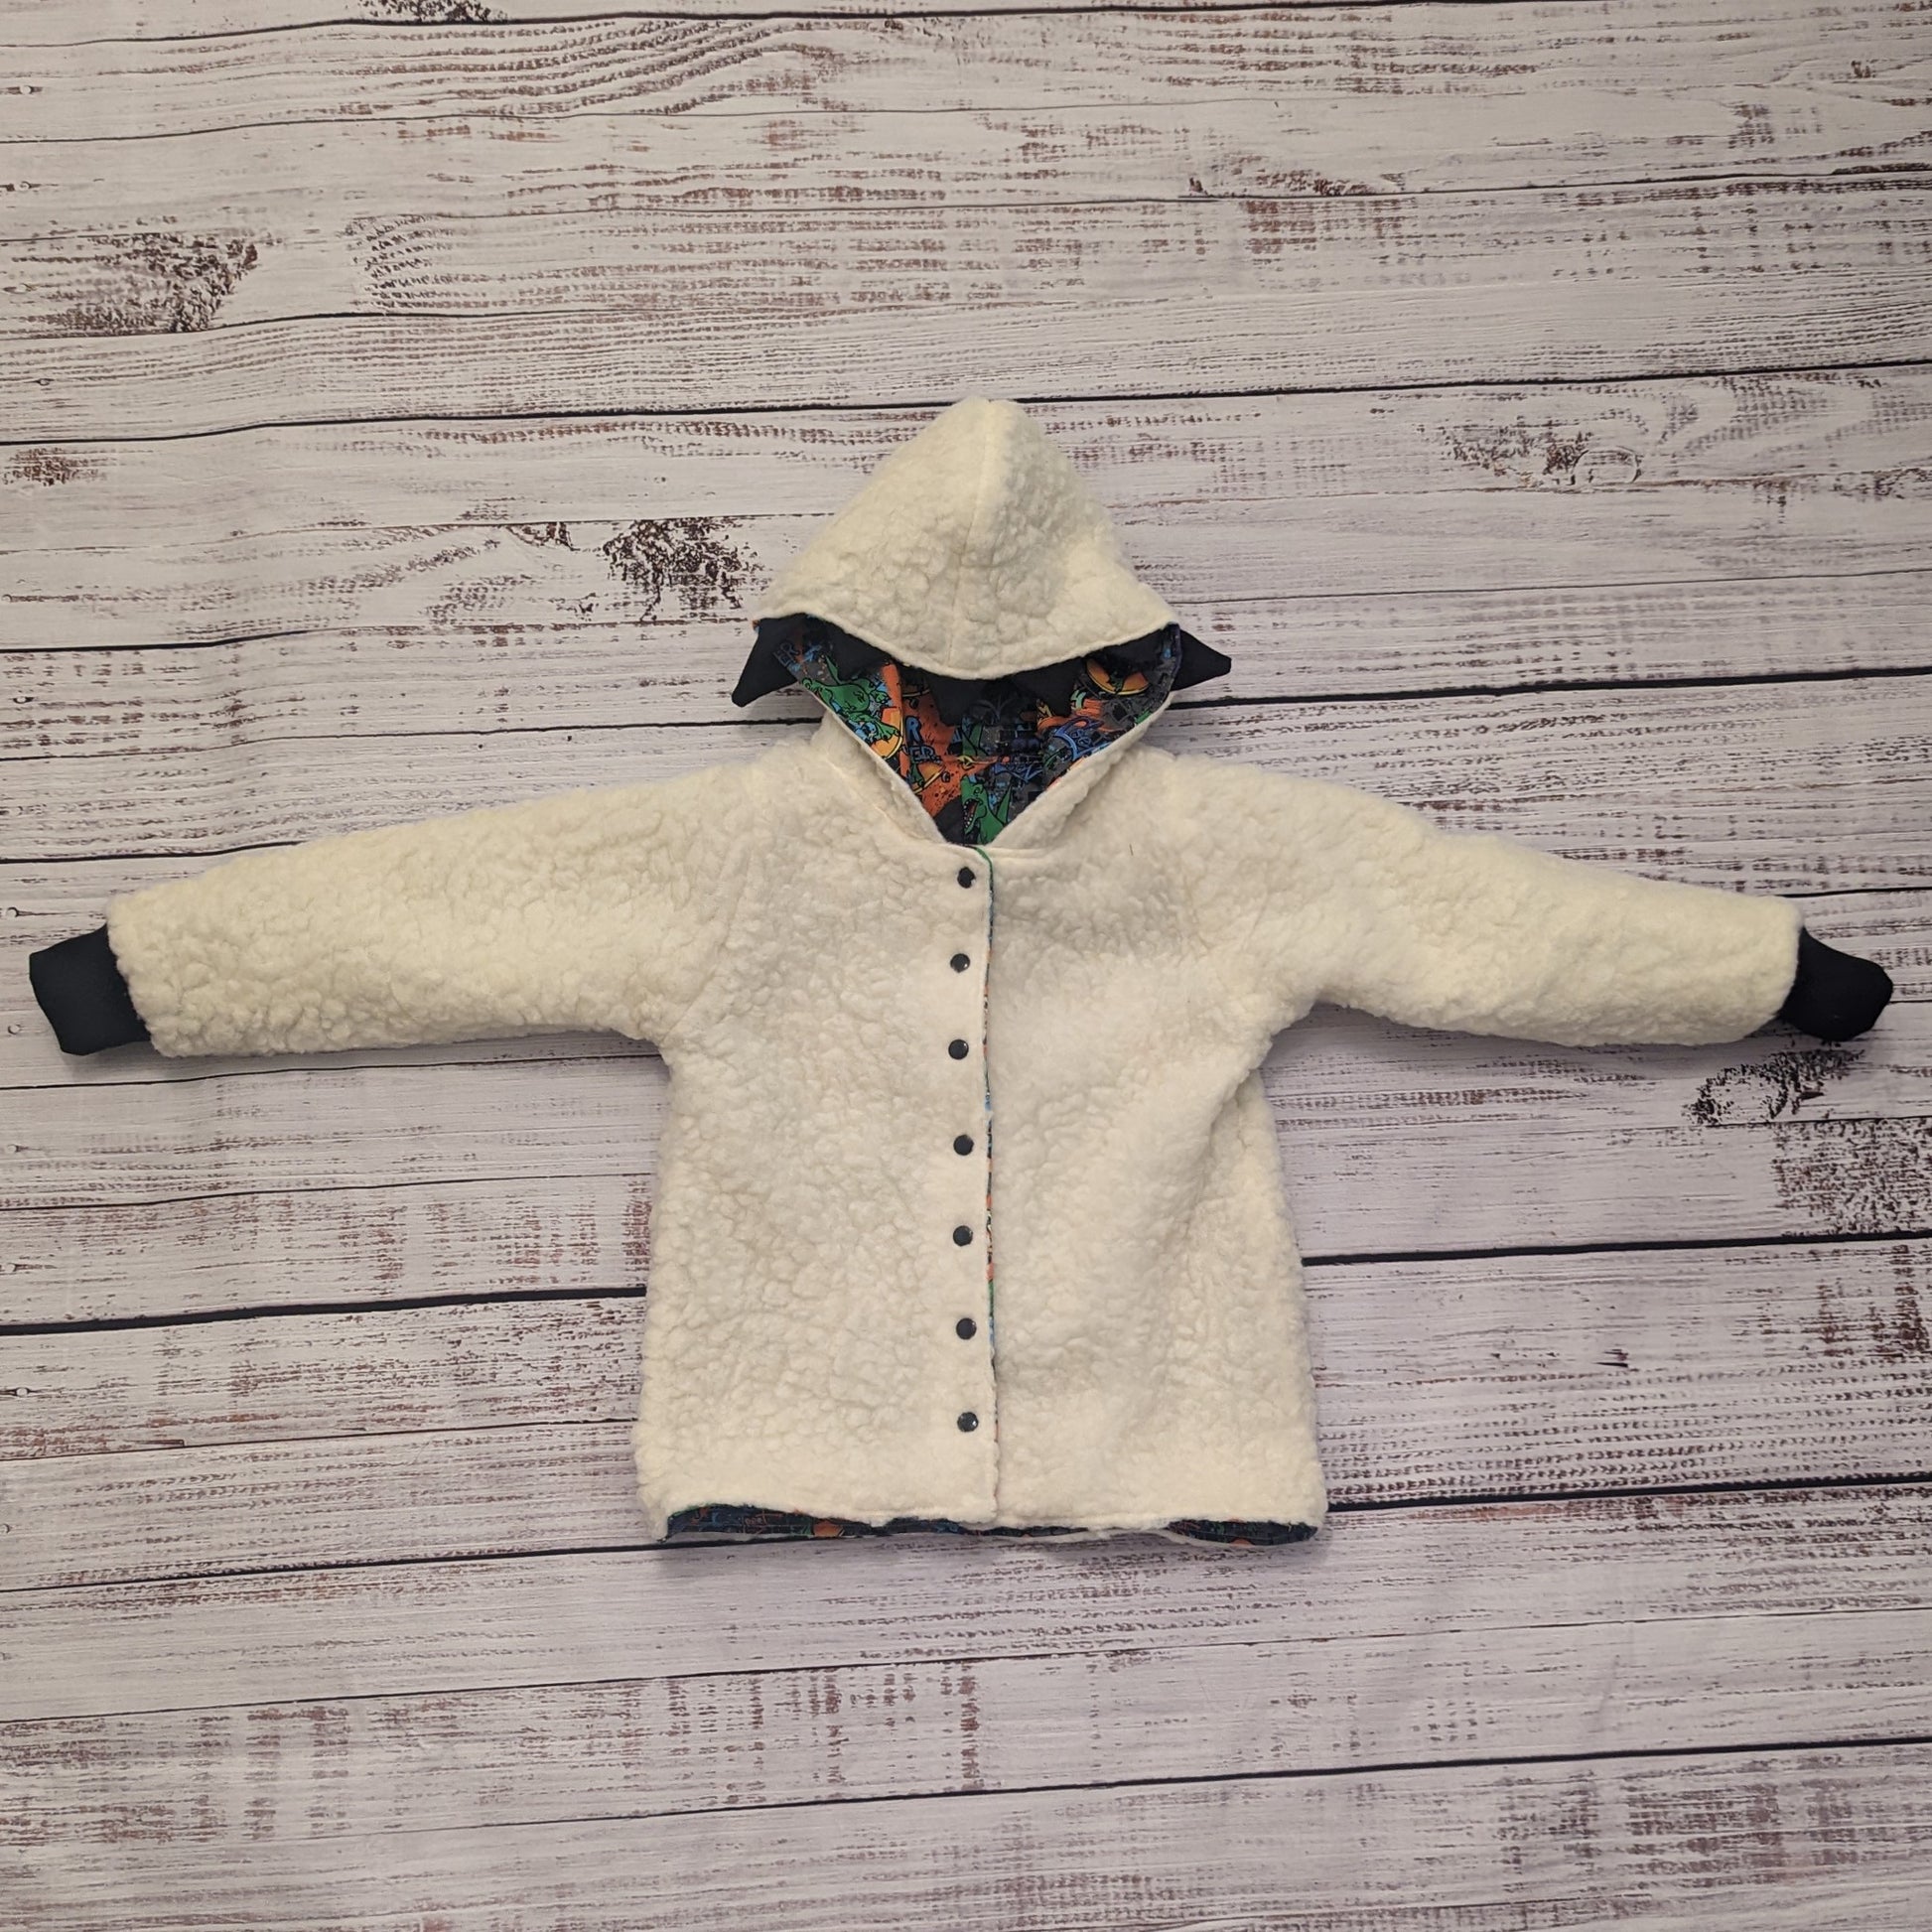 The ferociously cool street Dino reversible coat, shown with dinosaur teeth and spines for added fun. Handmade using street dino cotton French terry, black cotton ribbing and sherpa fur. Showing the reverse as a sherpa fur hoodie.